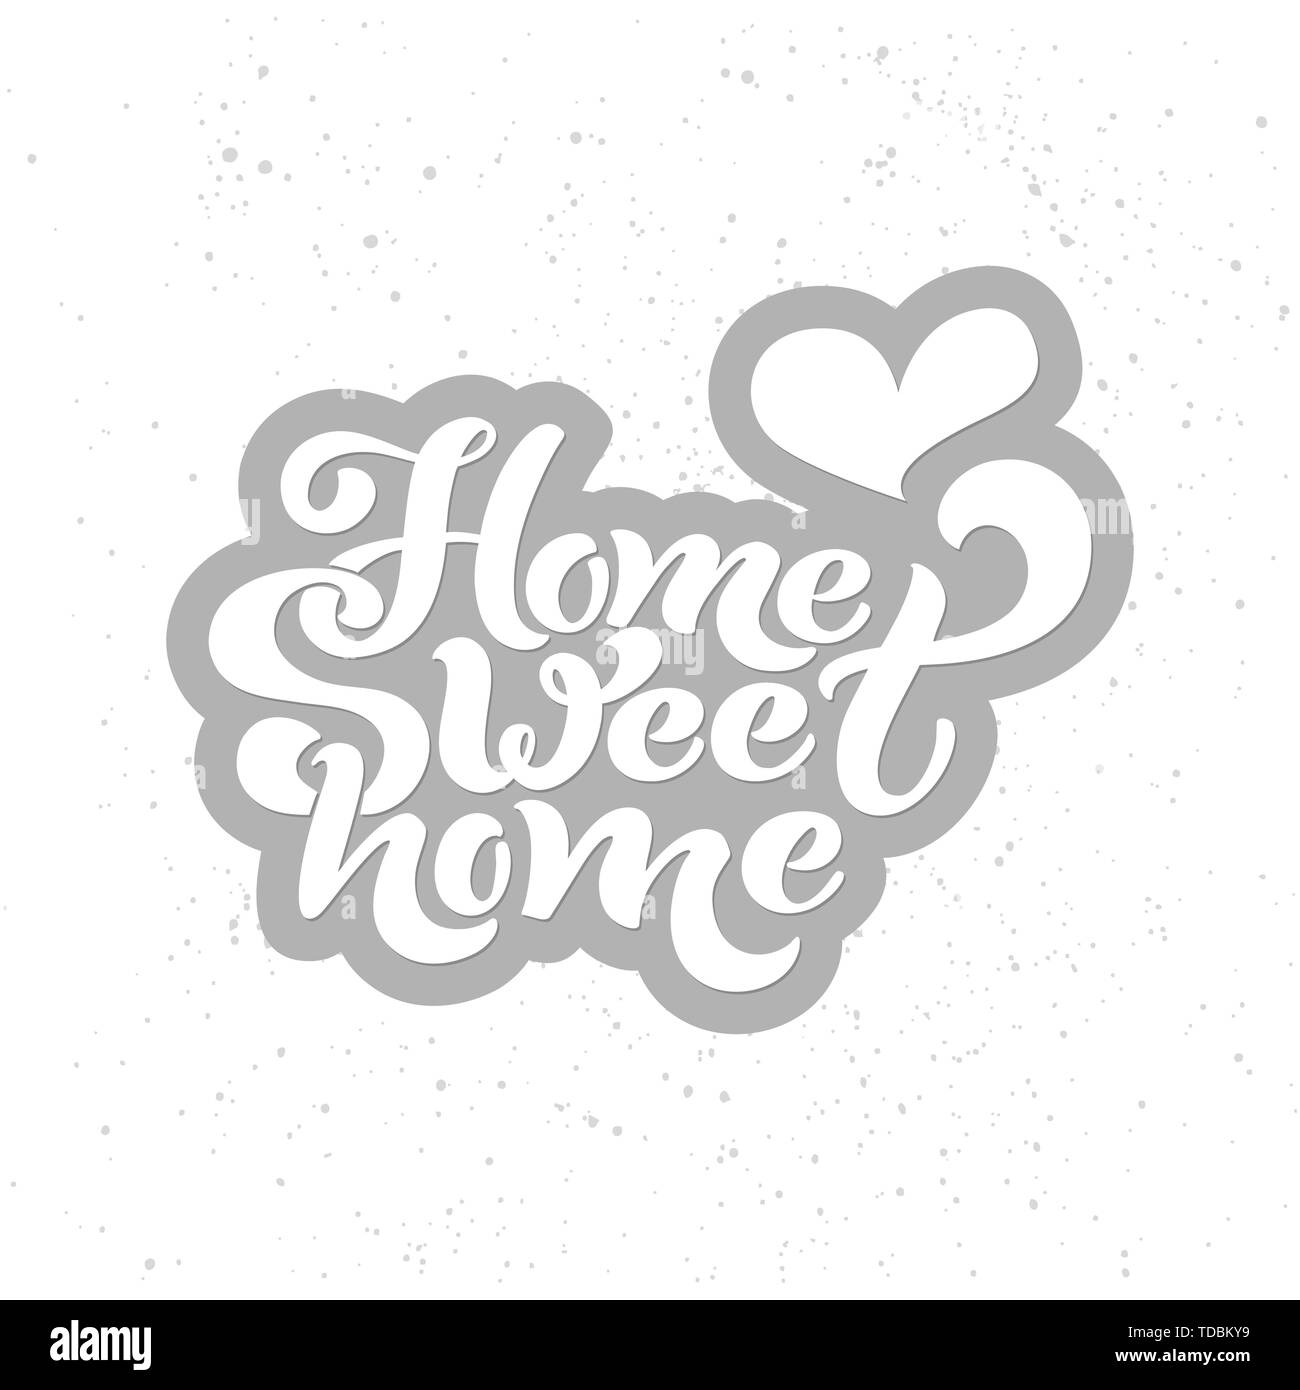 Home sweet home. Typographic vector design for greeting card, invitation card, background, lettering composition. Handwritten modern brush lettering. Stock Vector